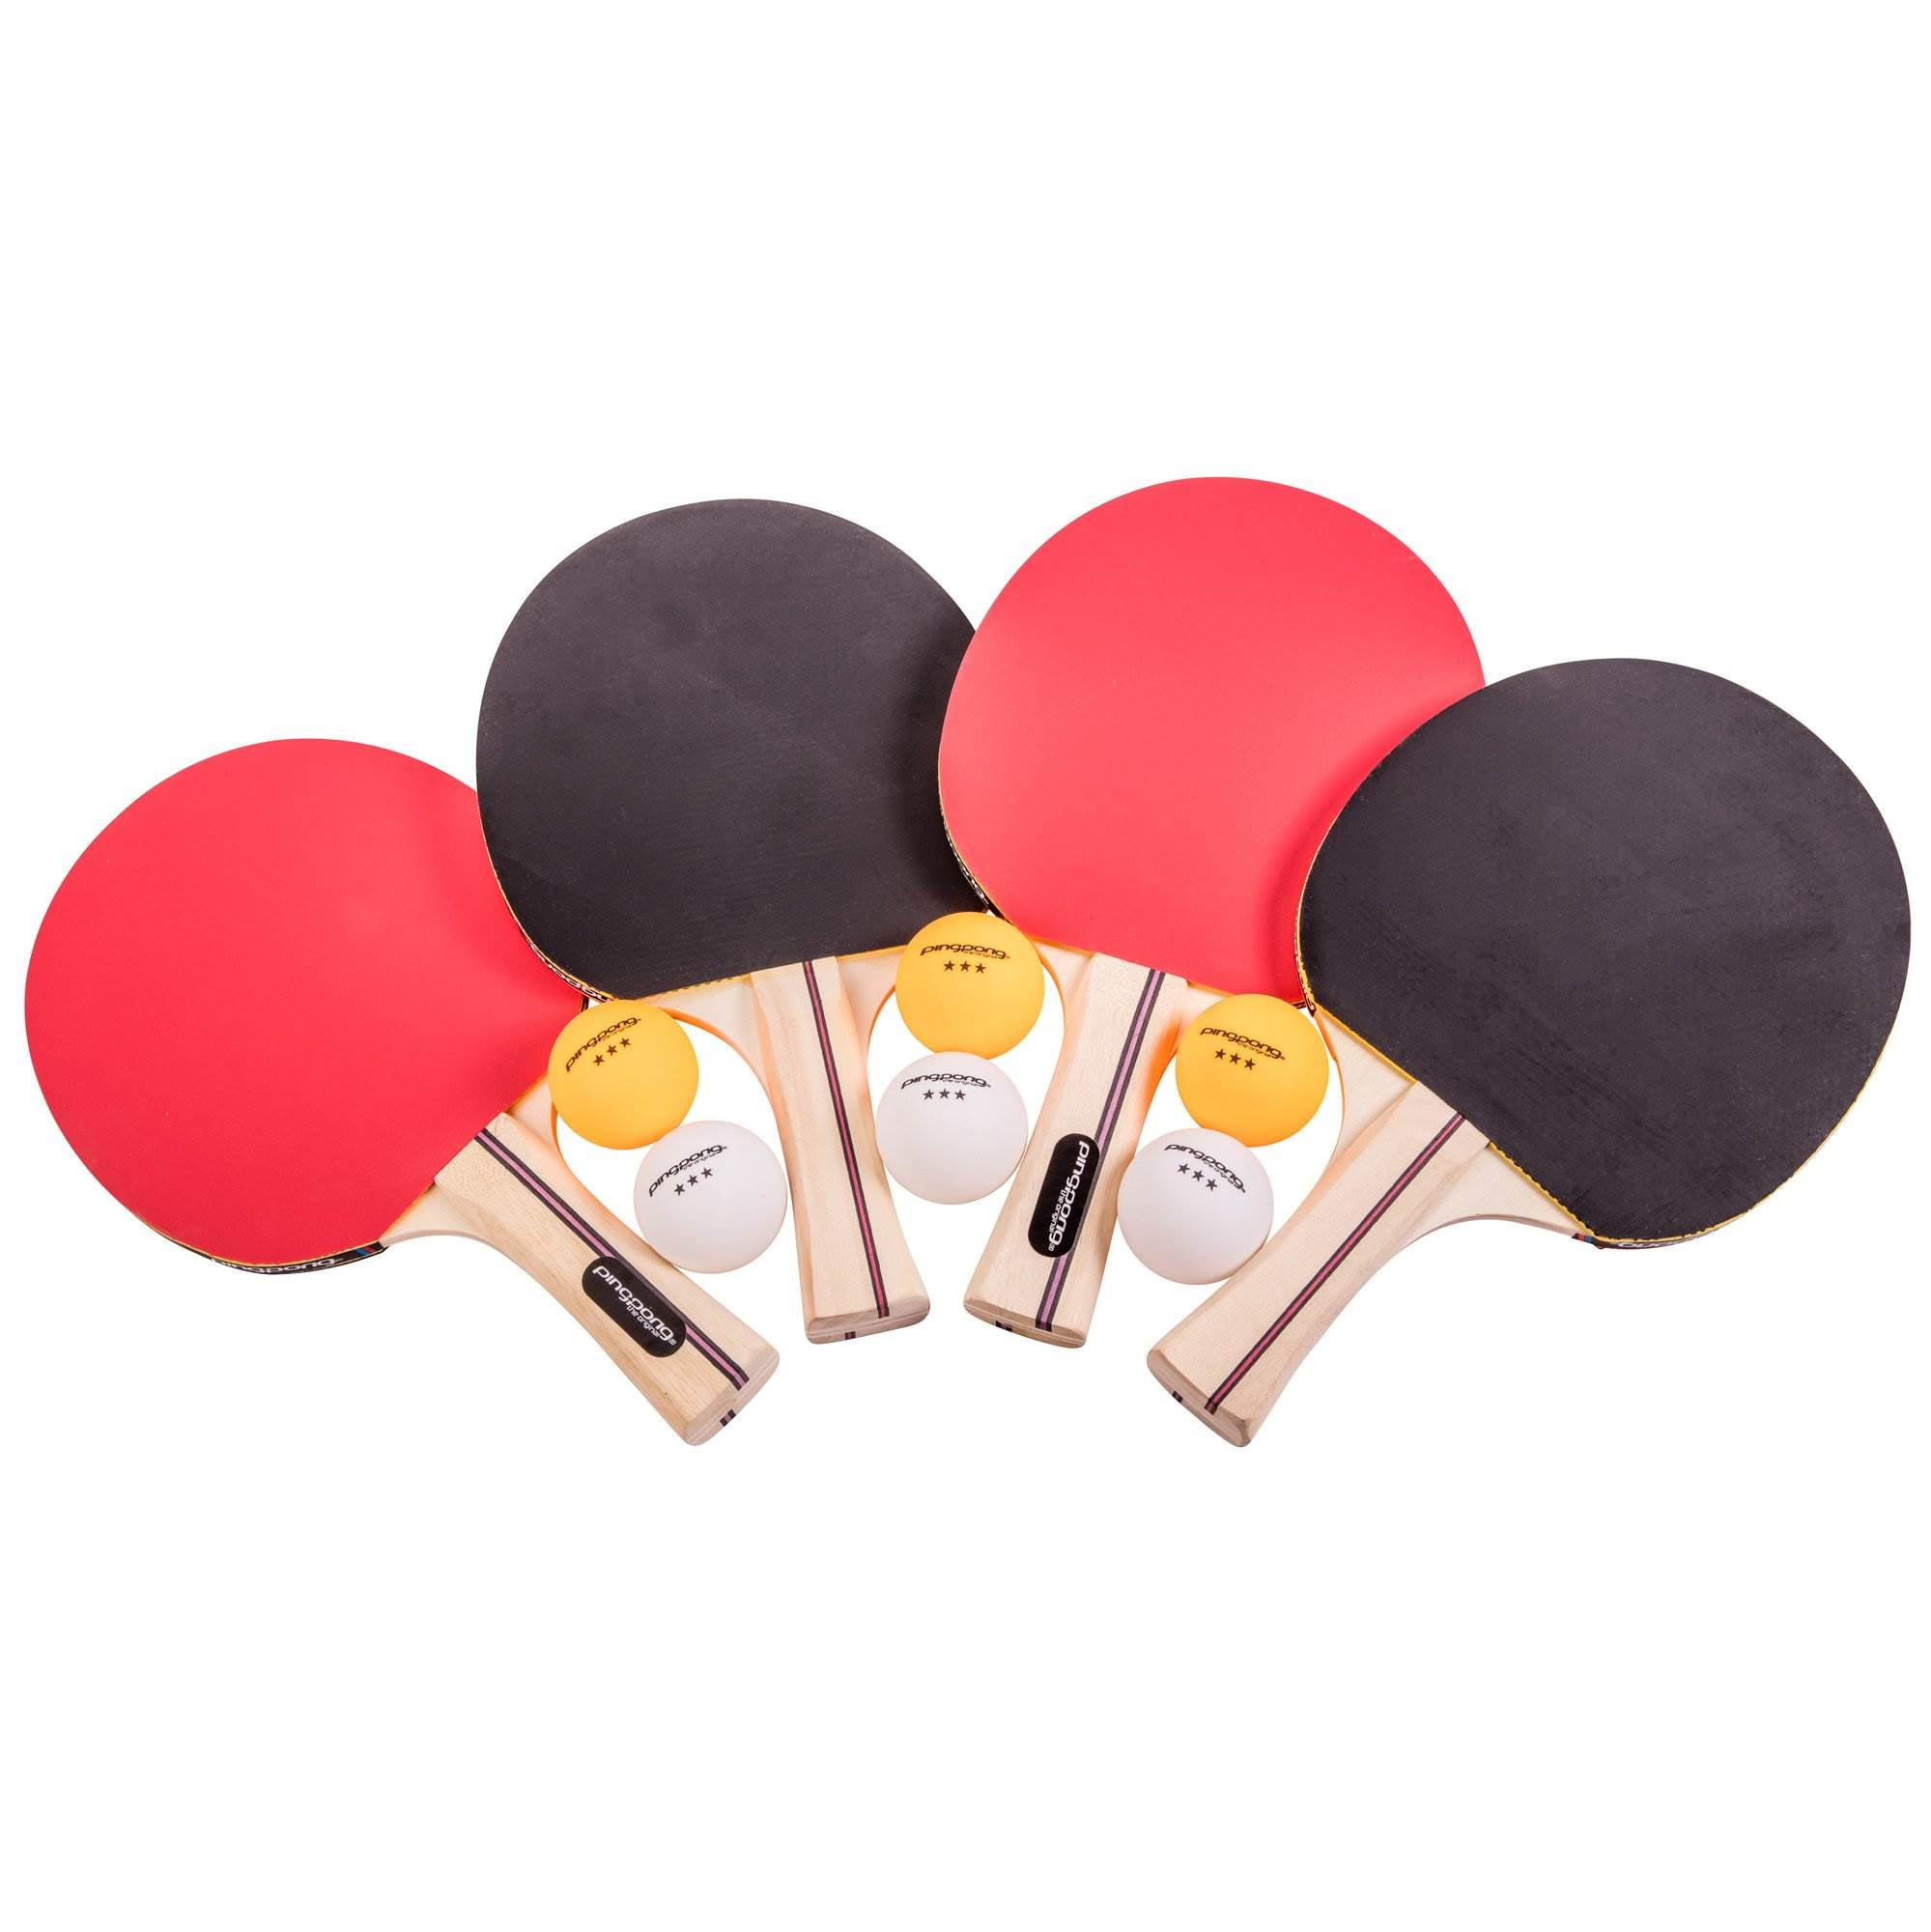  Folding Rolling Table Tennis Table Indoor Ping Pong Table with  2 Paddles 2 Balls 1 Net and Post Set Fold-Up Design 4 Wheels for Easy  Movement Perfect Christmas New Year